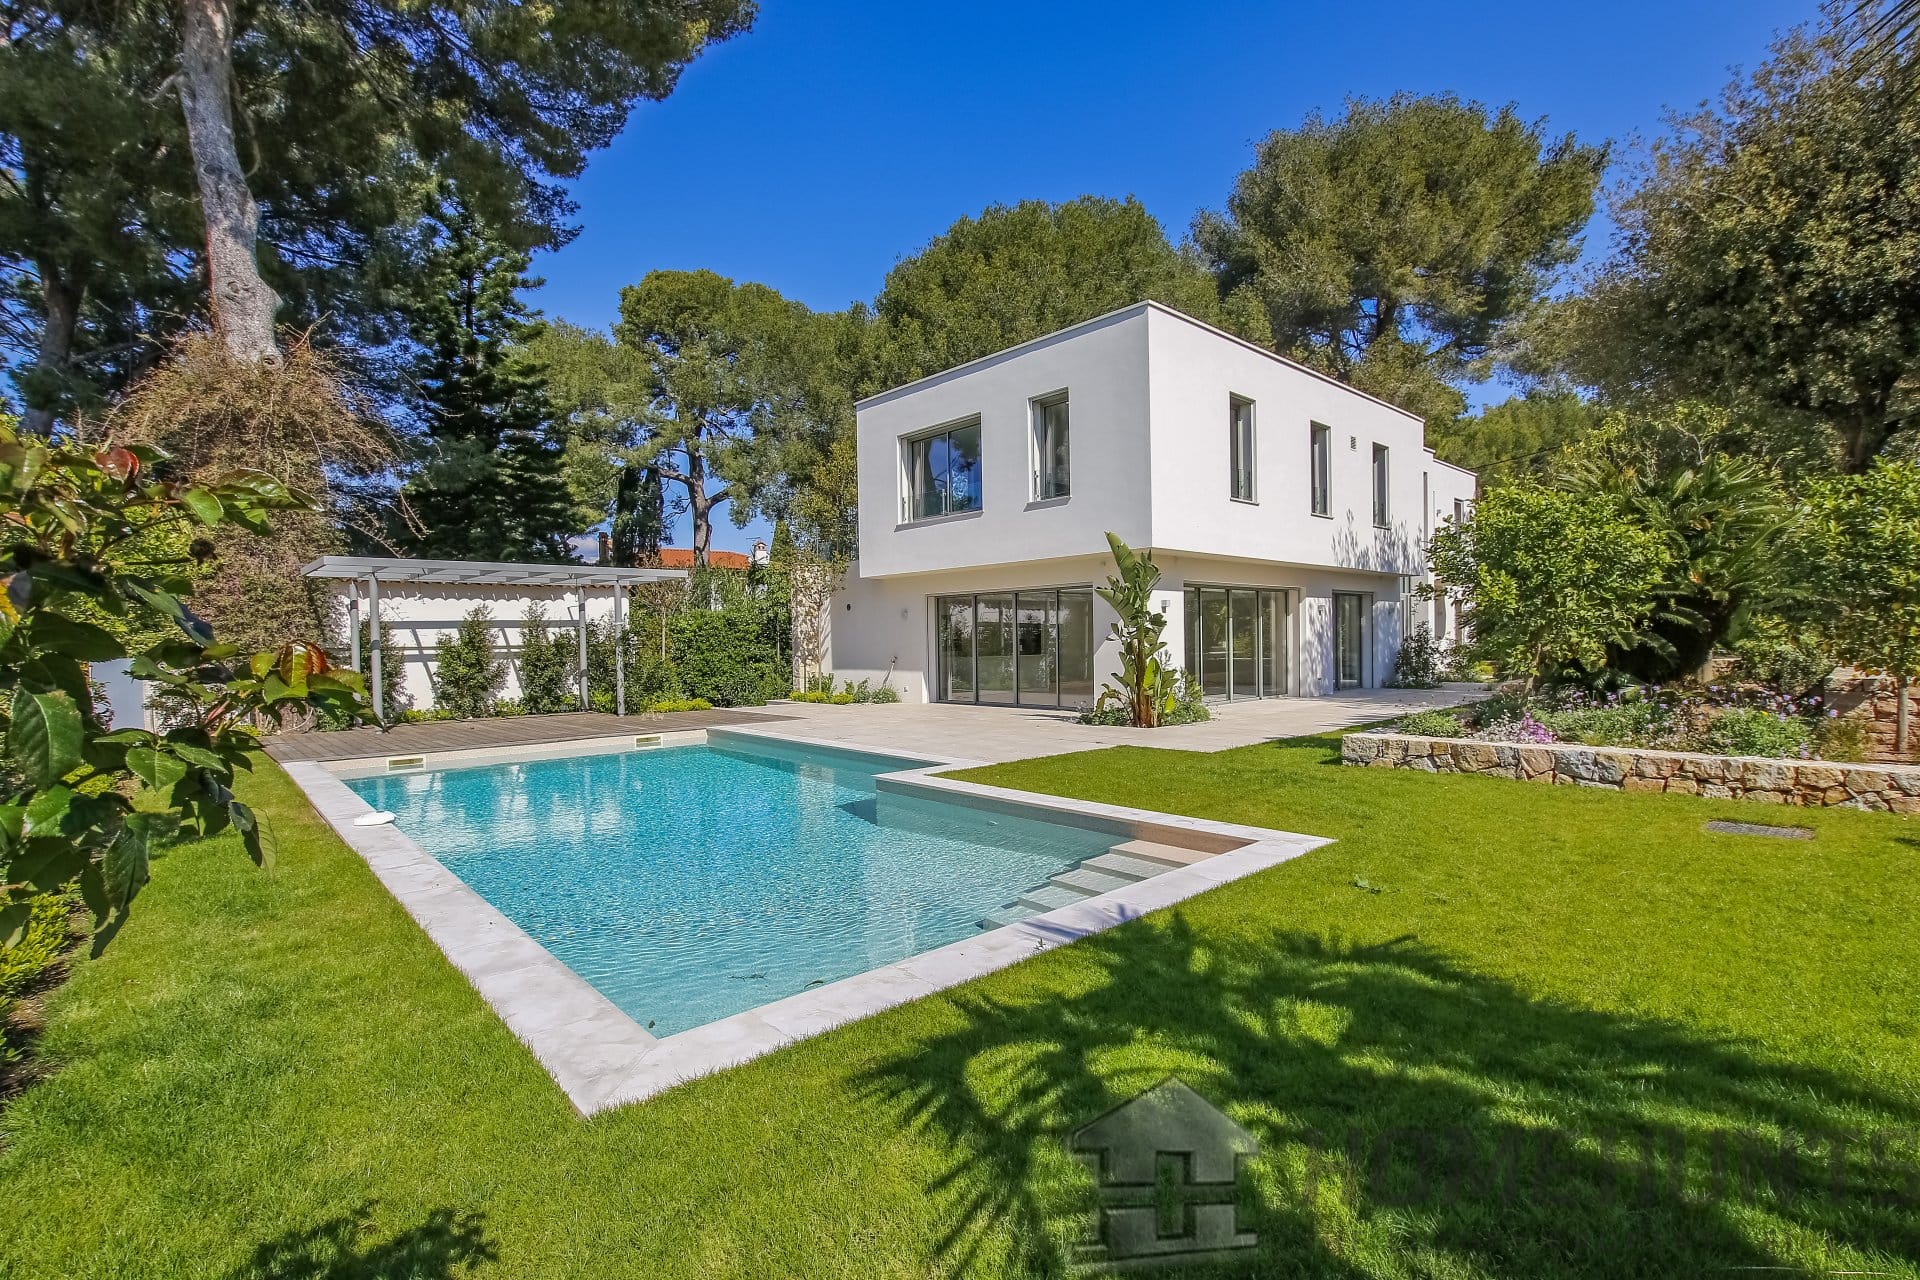 Villa/House For Sale in Antibes 15